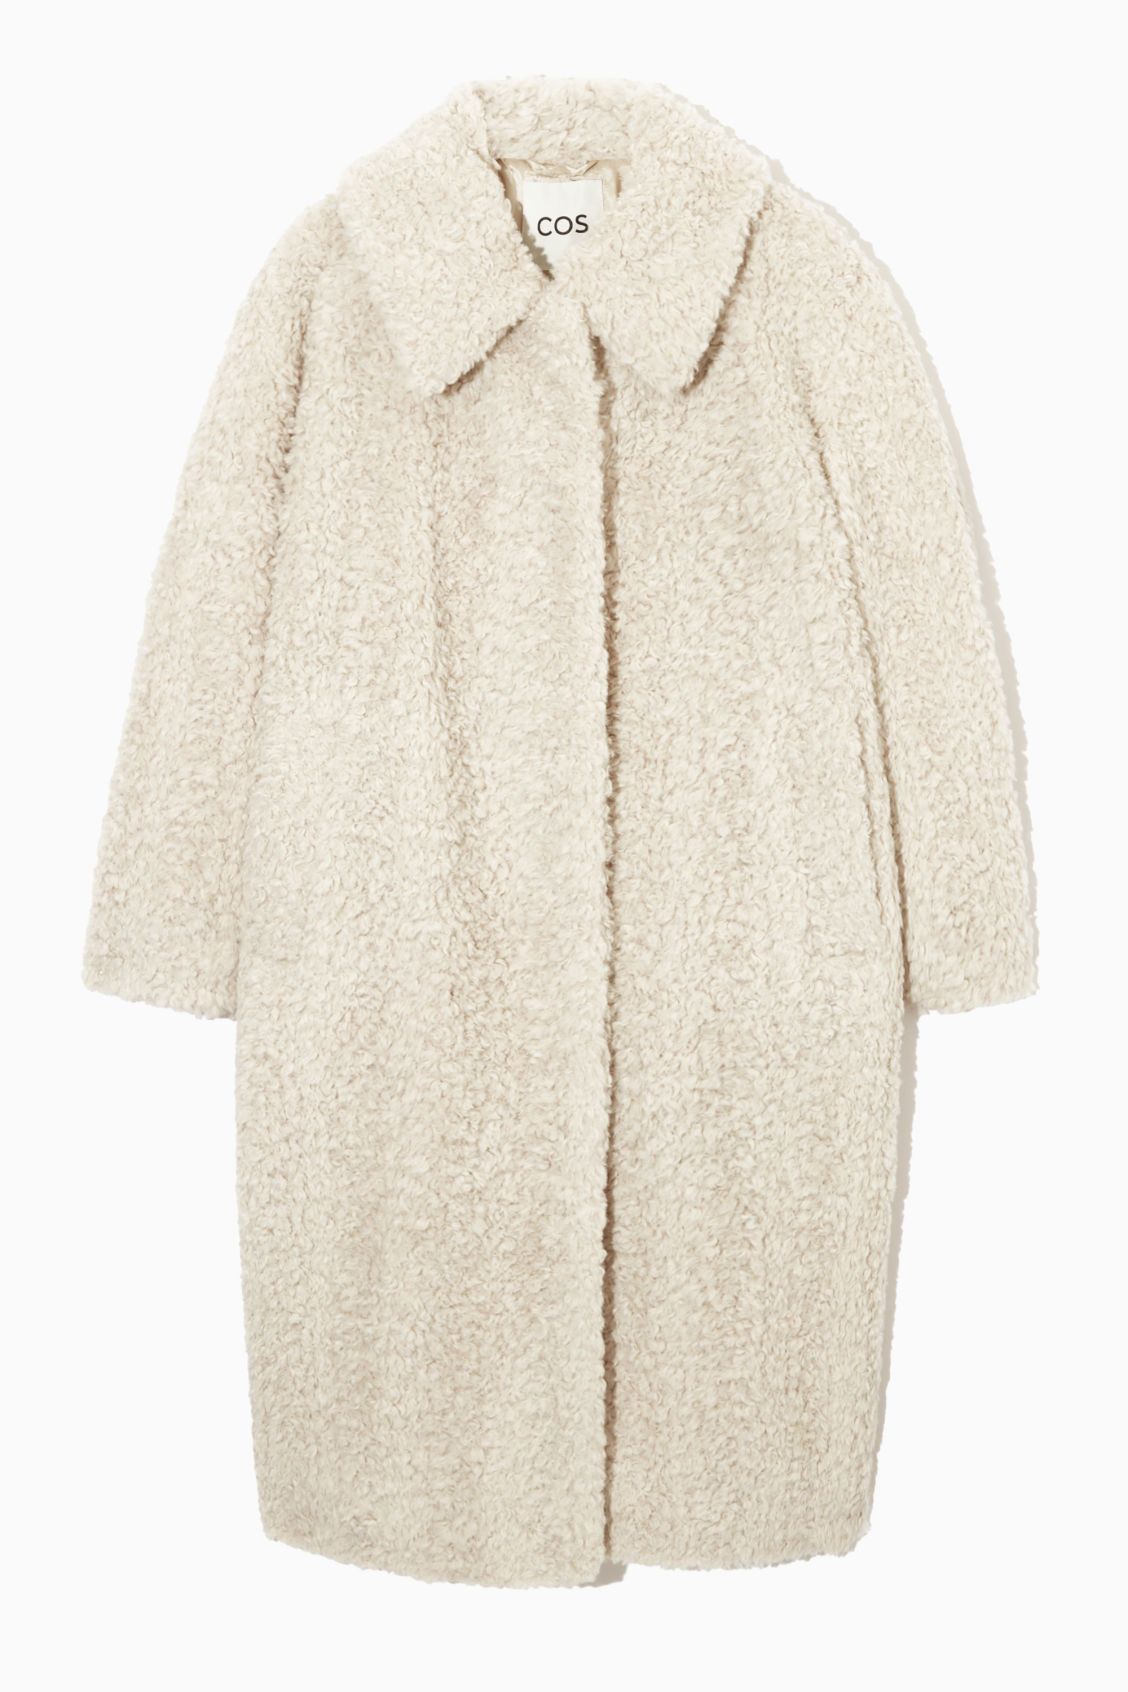 FAUX SHEARLING COAT - OFF-WHITE - COS | COS UK